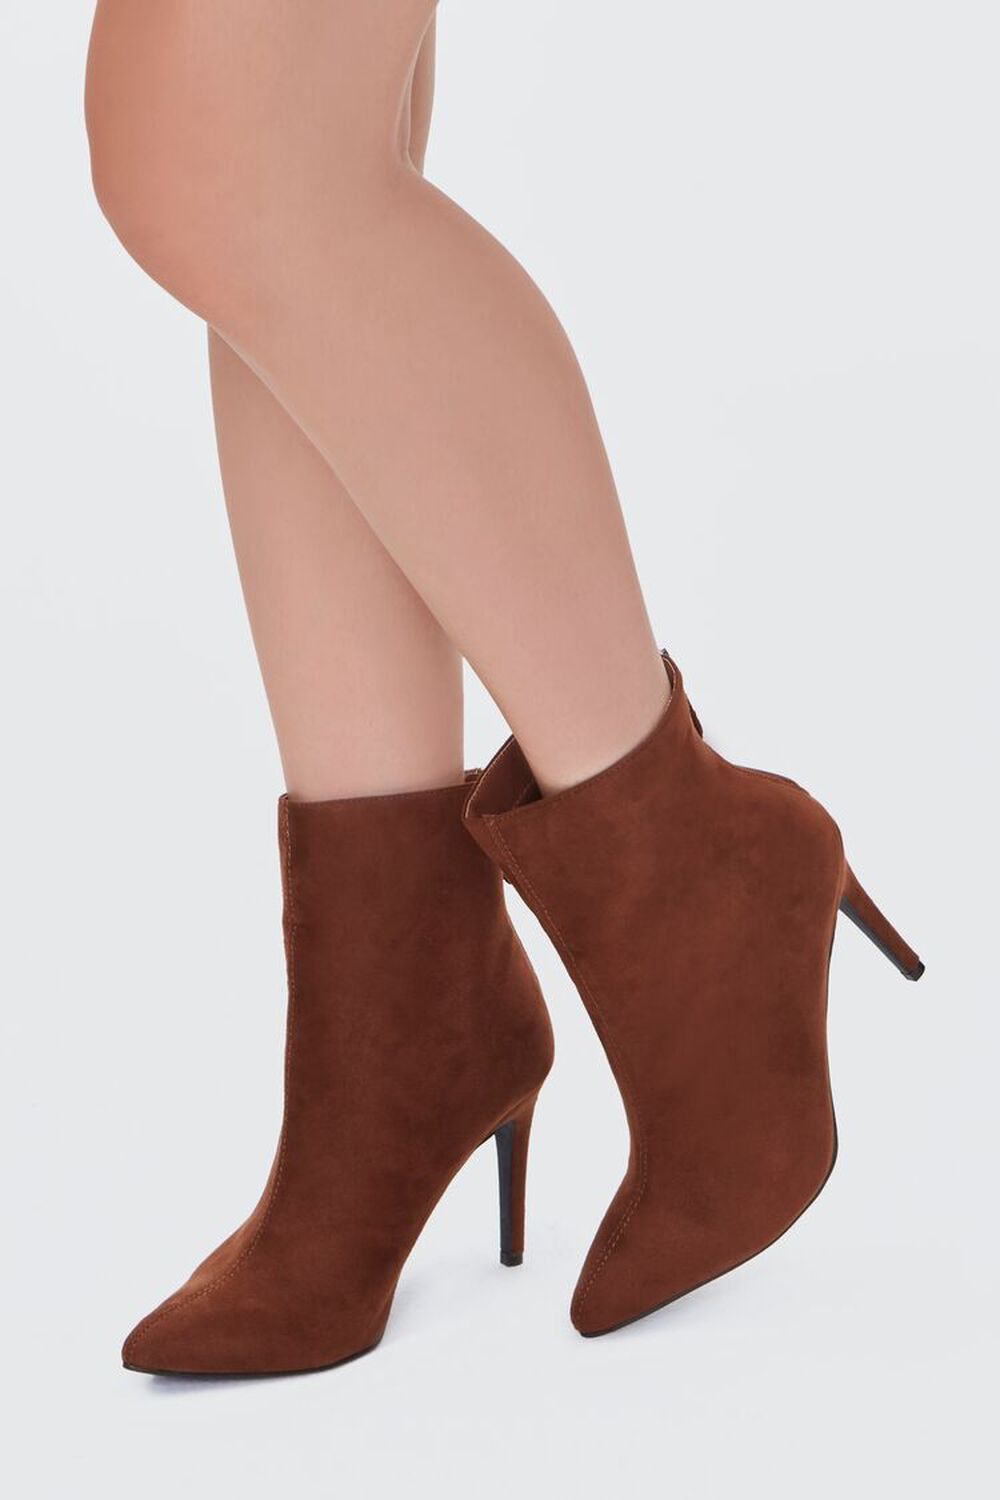 BROWN Faux Suede Stiletto Booties, image 1